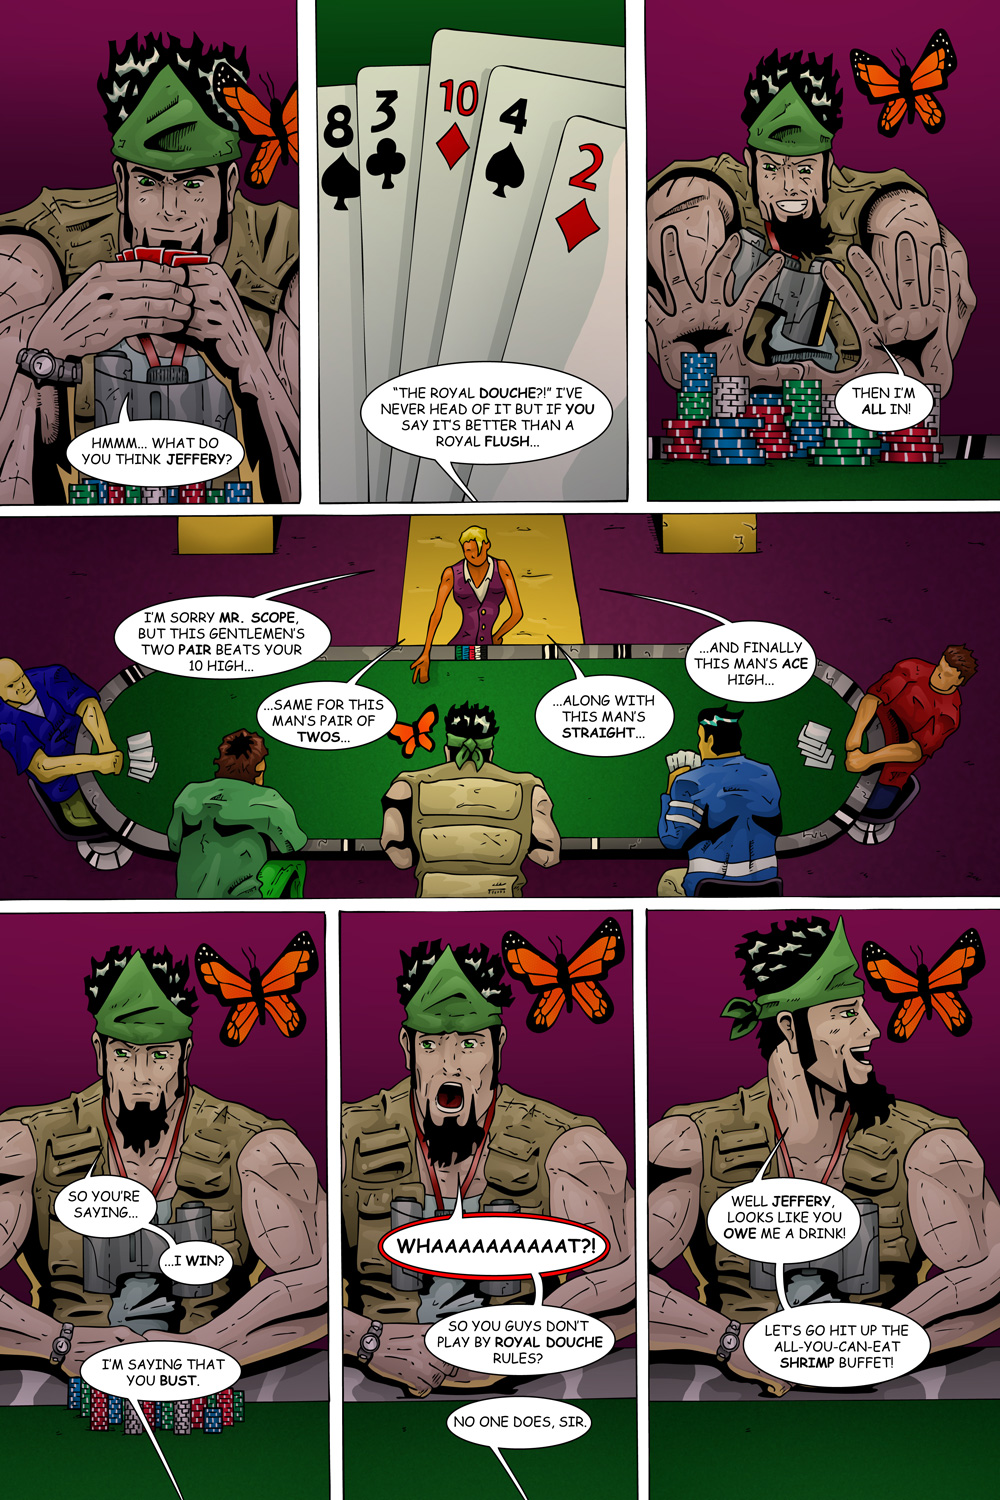 MISSION 005: PAGE 07 “THE ROYAL DOUCHE”